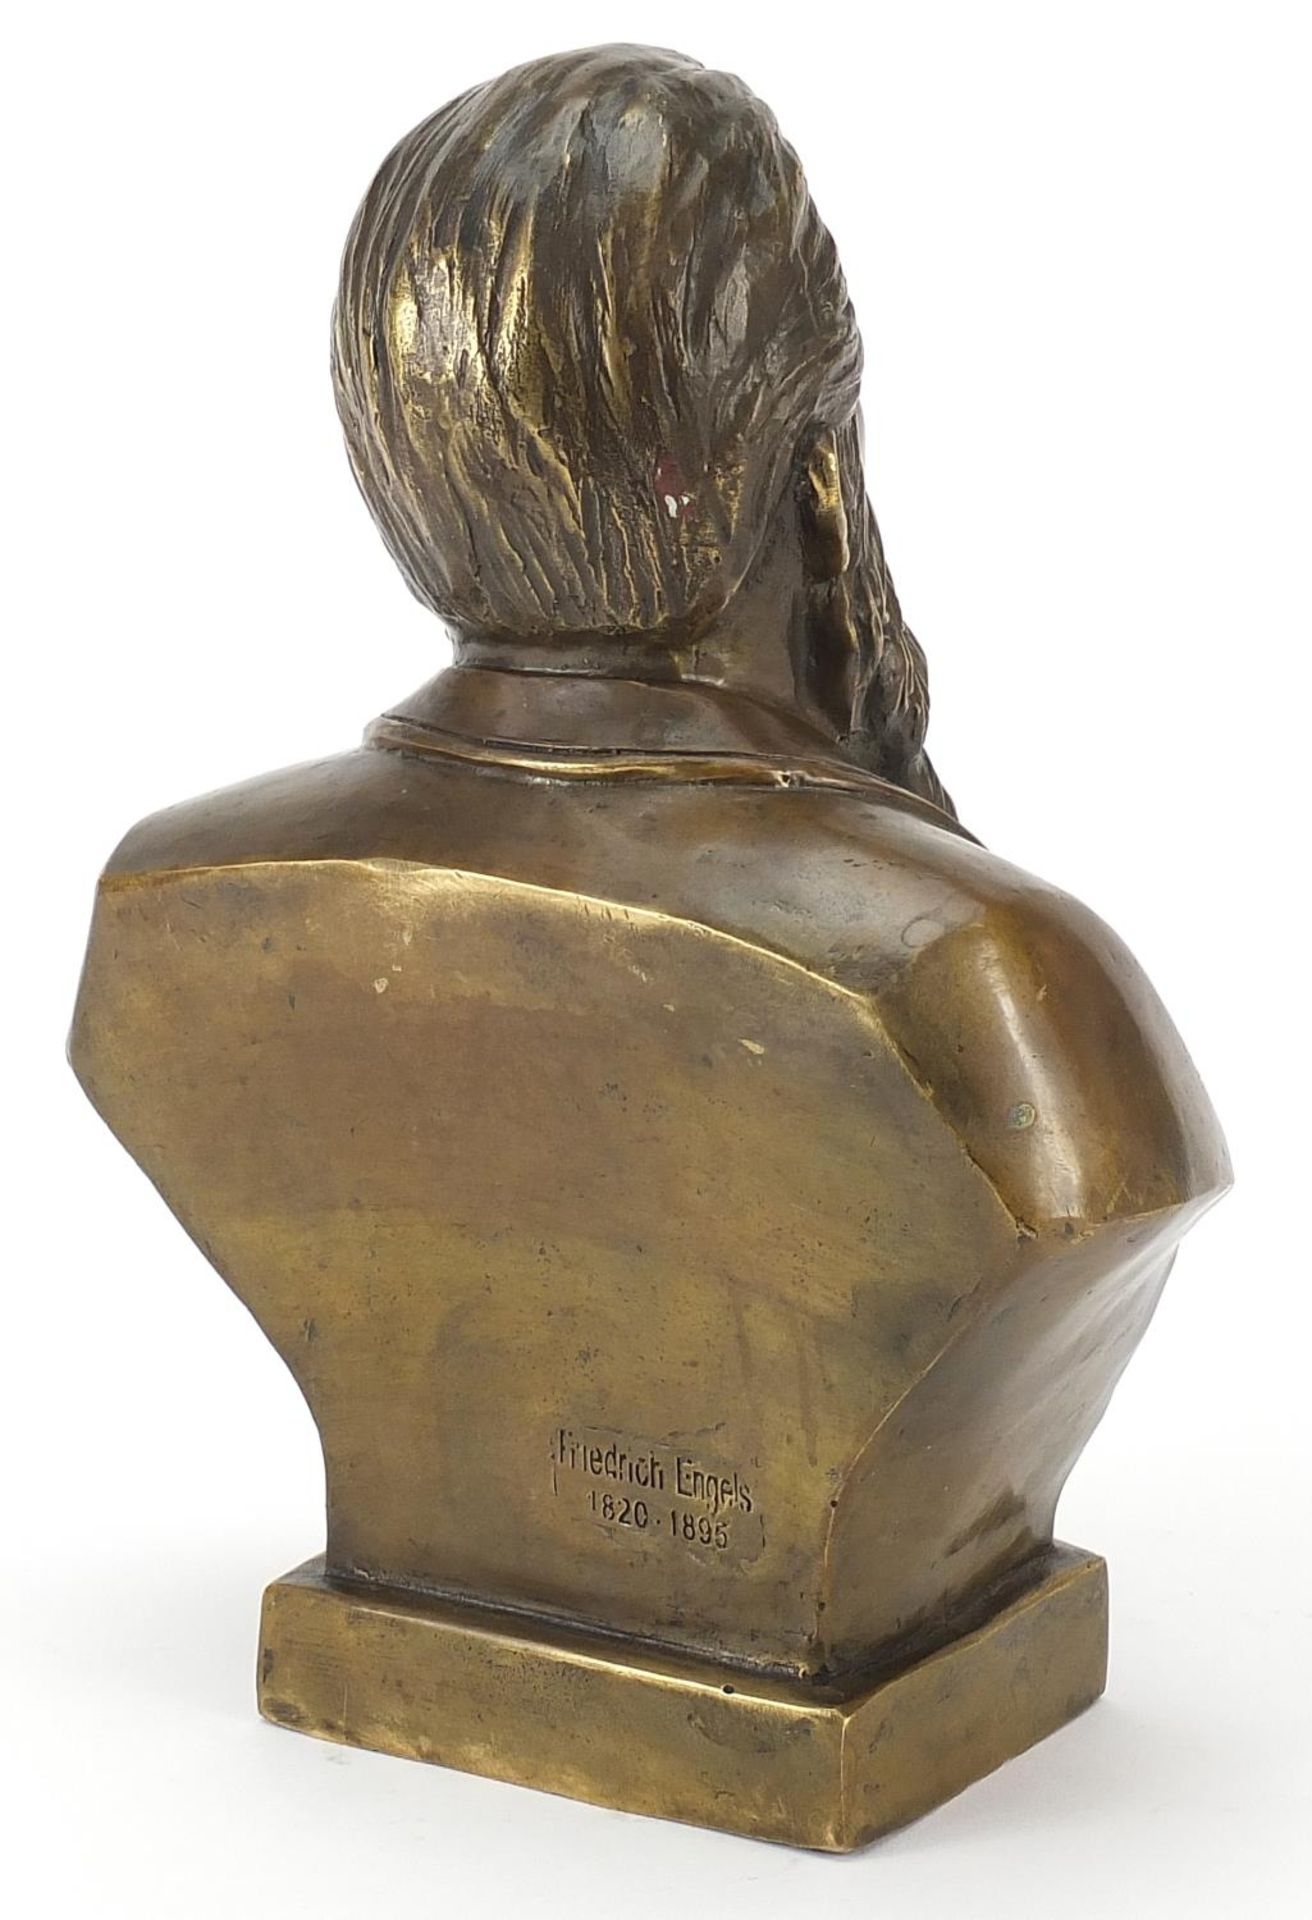 Patinated bronze bust of Friedrich Engel, 29.5cm high - Image 2 of 3